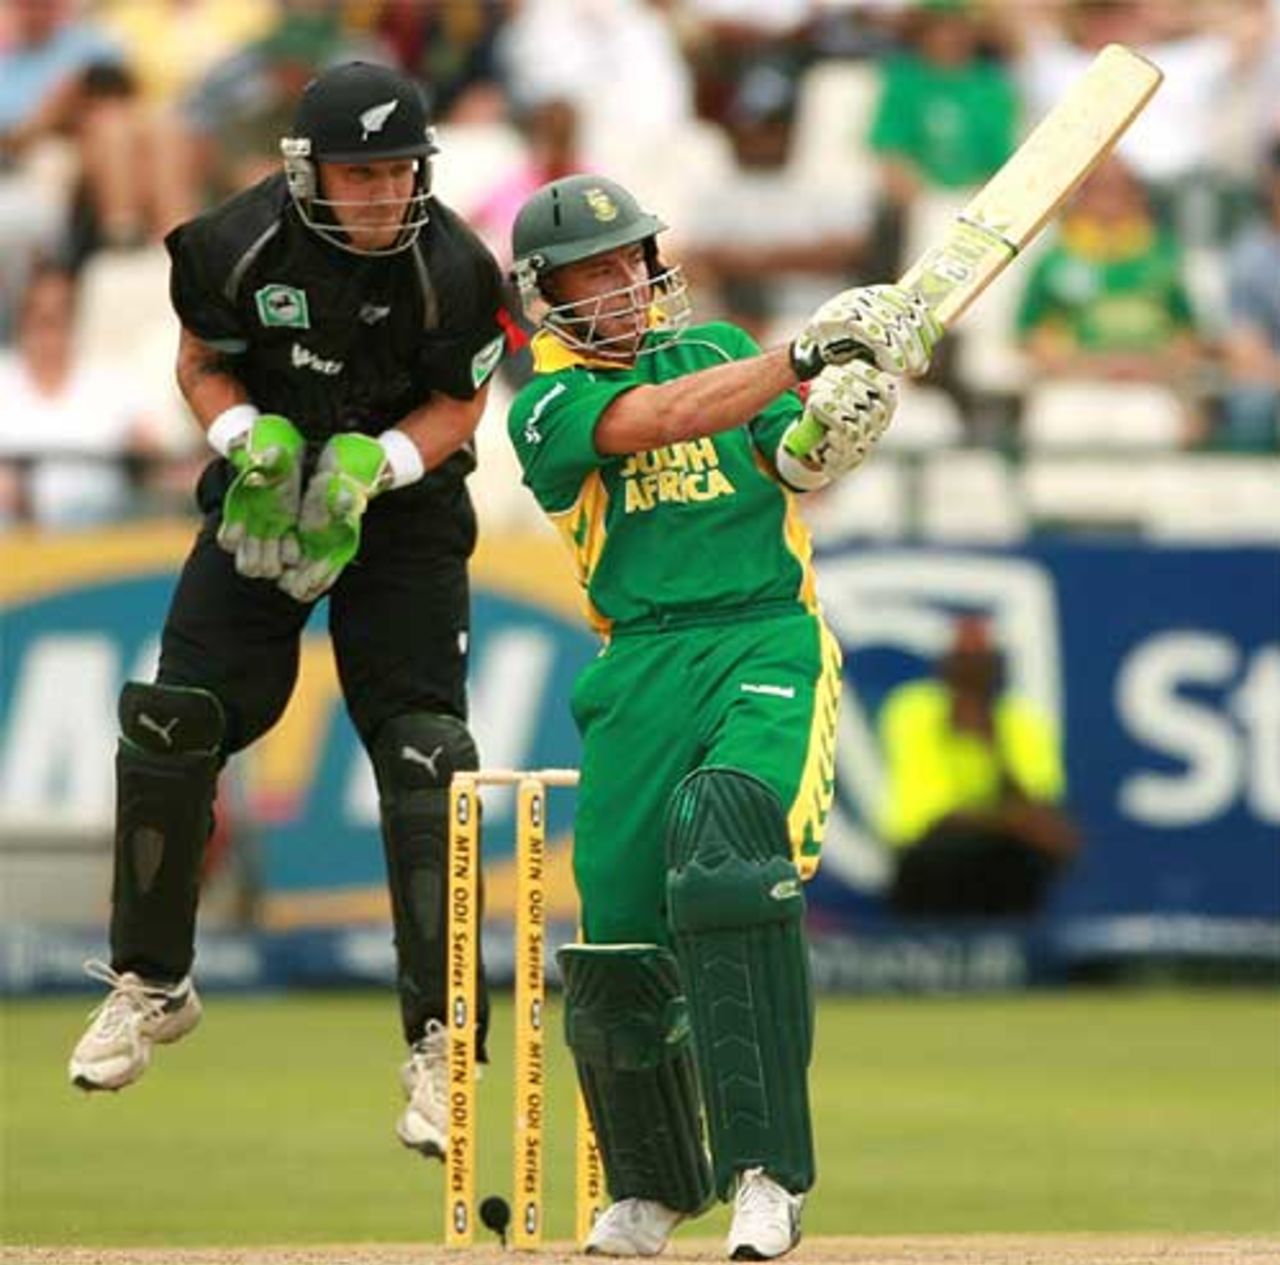 Herschelle Gibbs pulls one to the leg, South Africa v New Zealand, 3rd ODI, Cape Town, December 2, 2007